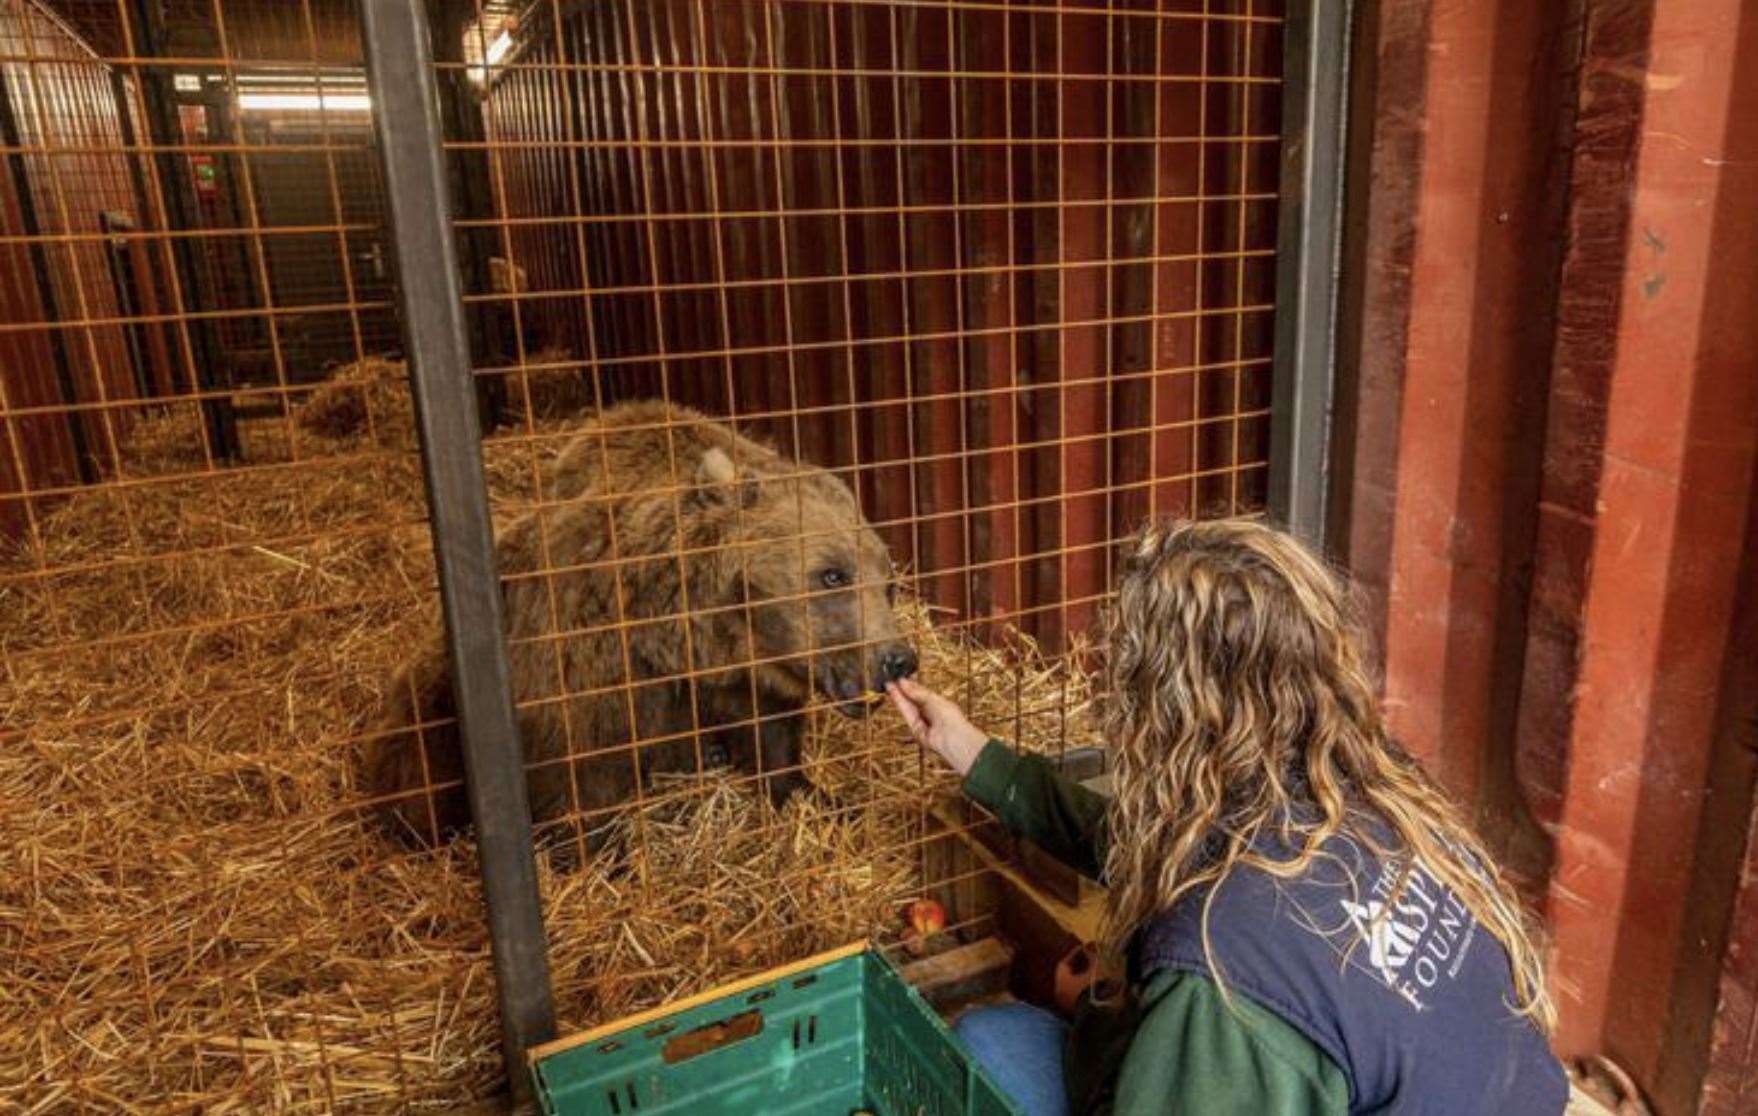 Sophia Fagan feeds a bear following its arrival from Andorra in 2020. She says the red tape is hampering efforts to breed and transfer animals around the world putting endangered species at even greater risk